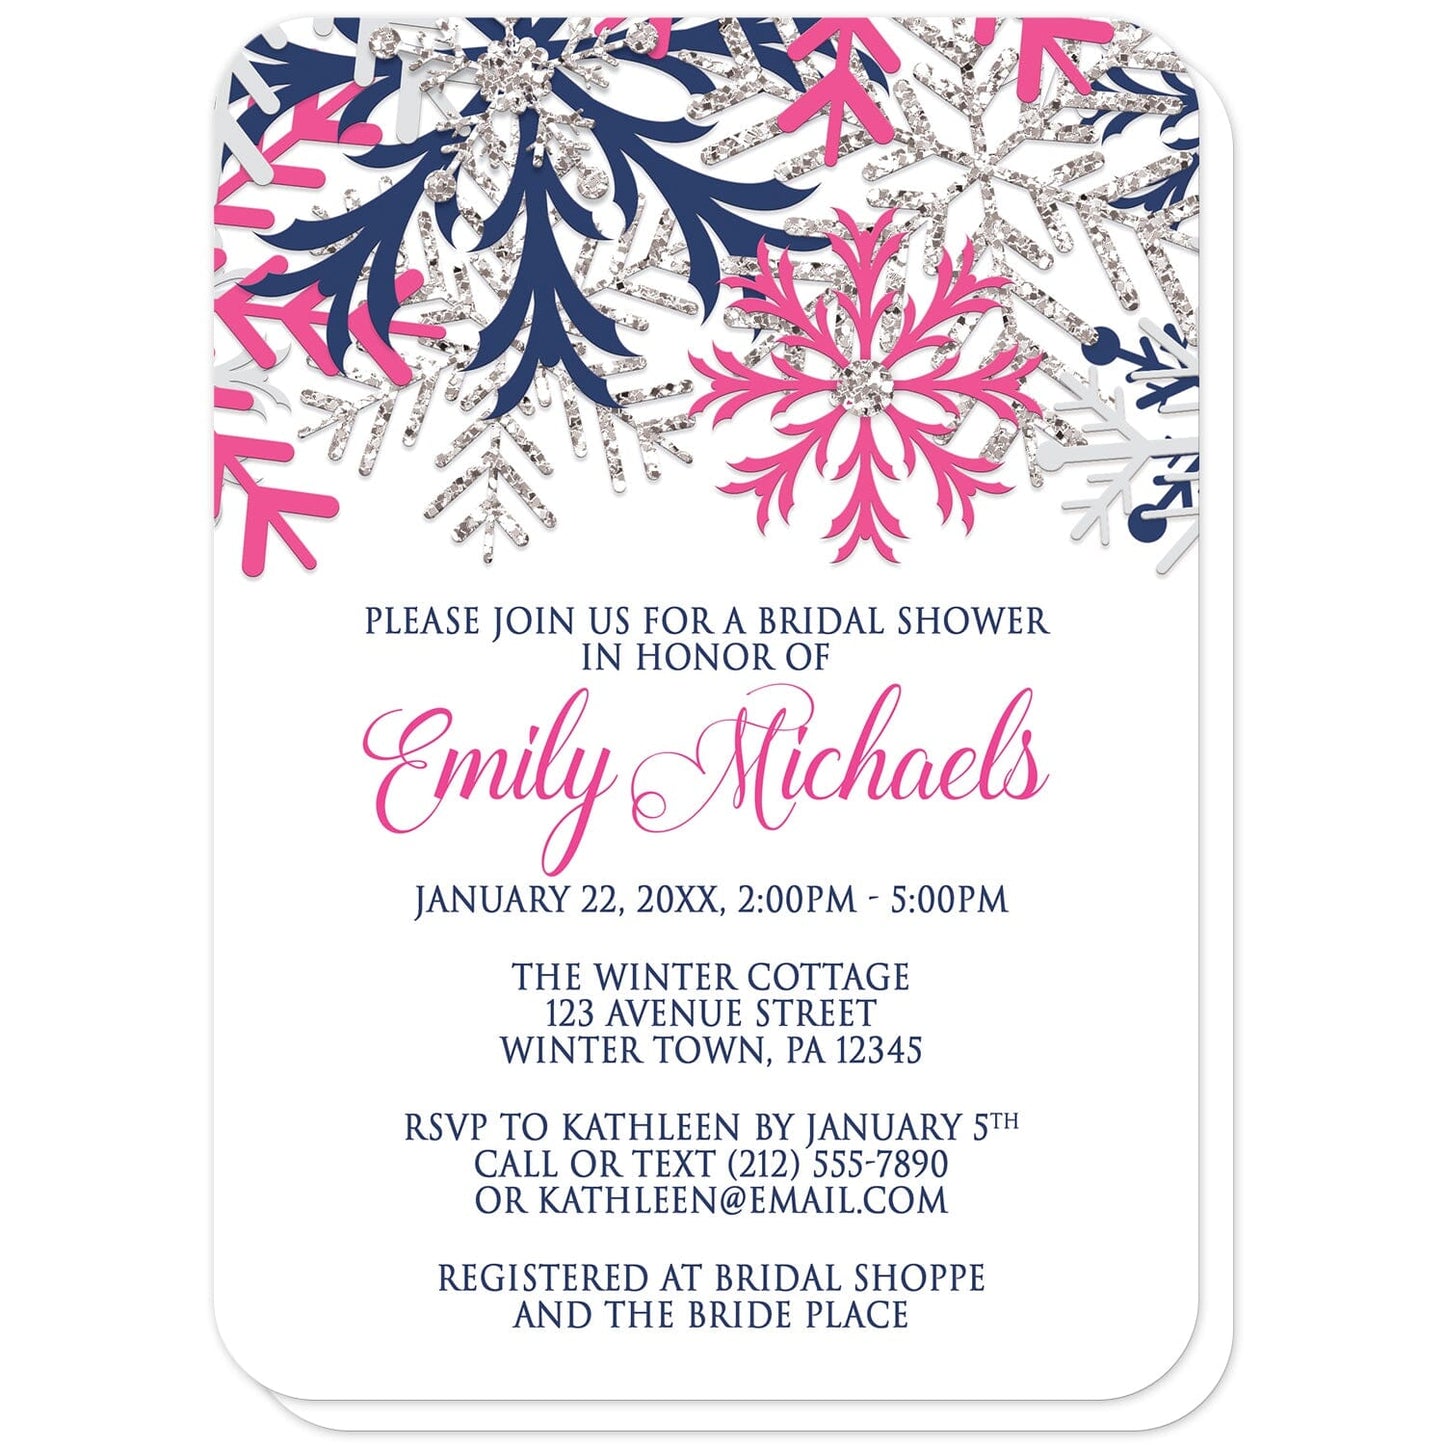 Winter Navy Fuchsia Snowflake Bridal Shower Invitations (with rounded corners) at Artistically Invited. Beautiful winter navy fuchsia snowflake bridal shower invitations designed with navy blue, fuchsia pink, silver-colored glitter-illustrated, and light gray snowflakes along the top over a white background. Your personalized bridal shower celebration details are custom printed in navy blue and fuchsia below the pretty snowflakes.